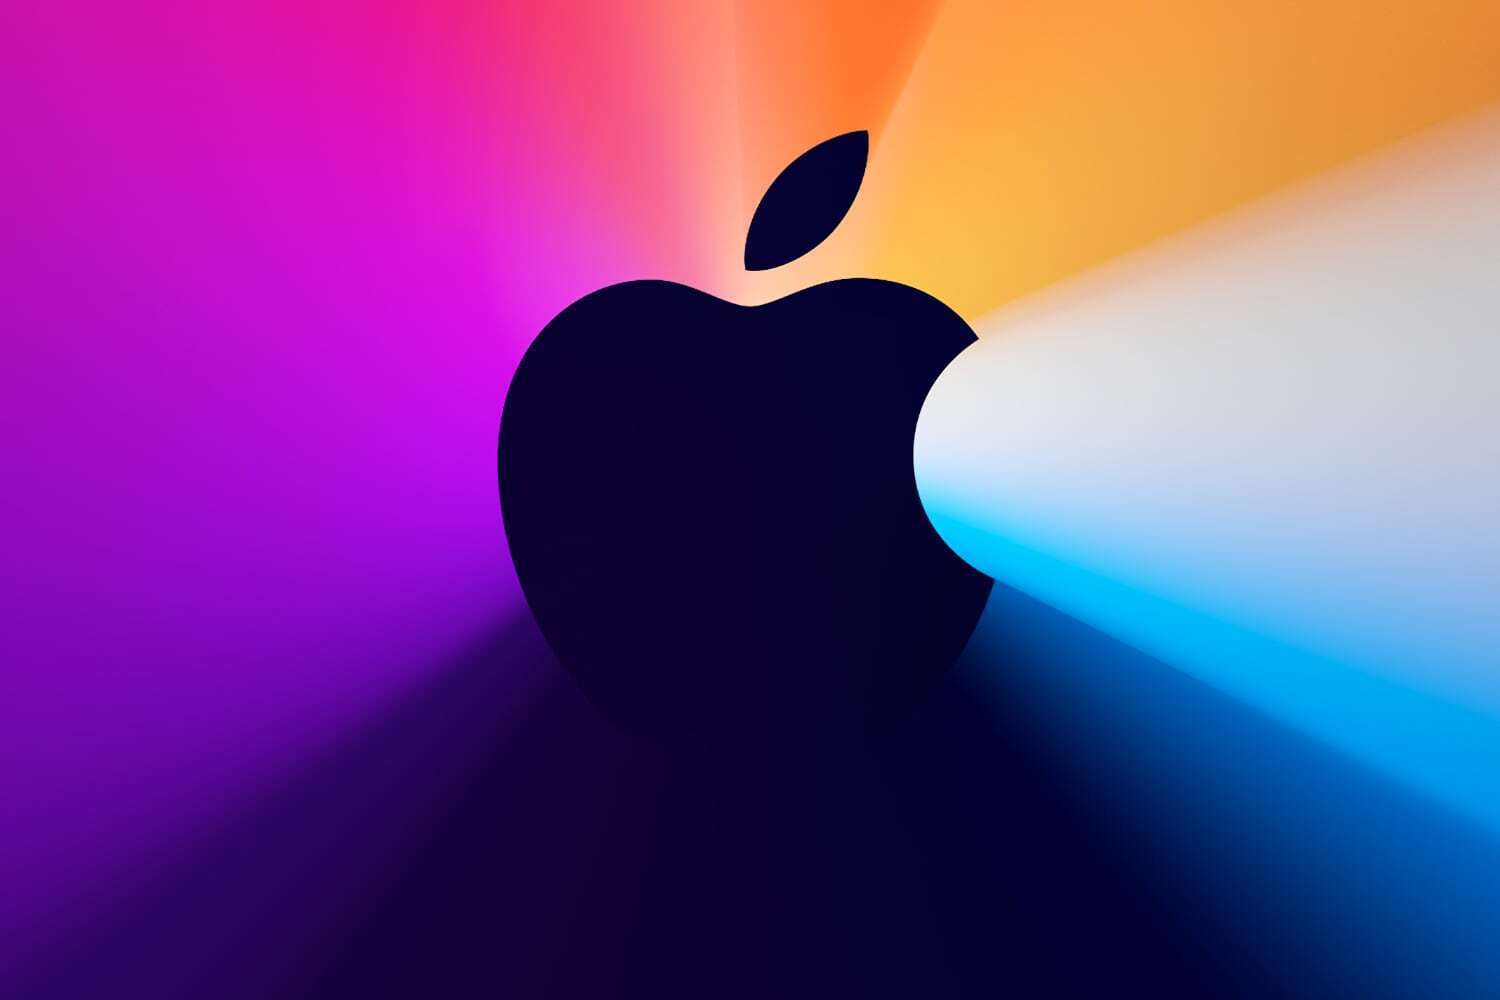 Apple event calendar: Looking ahead to 2022